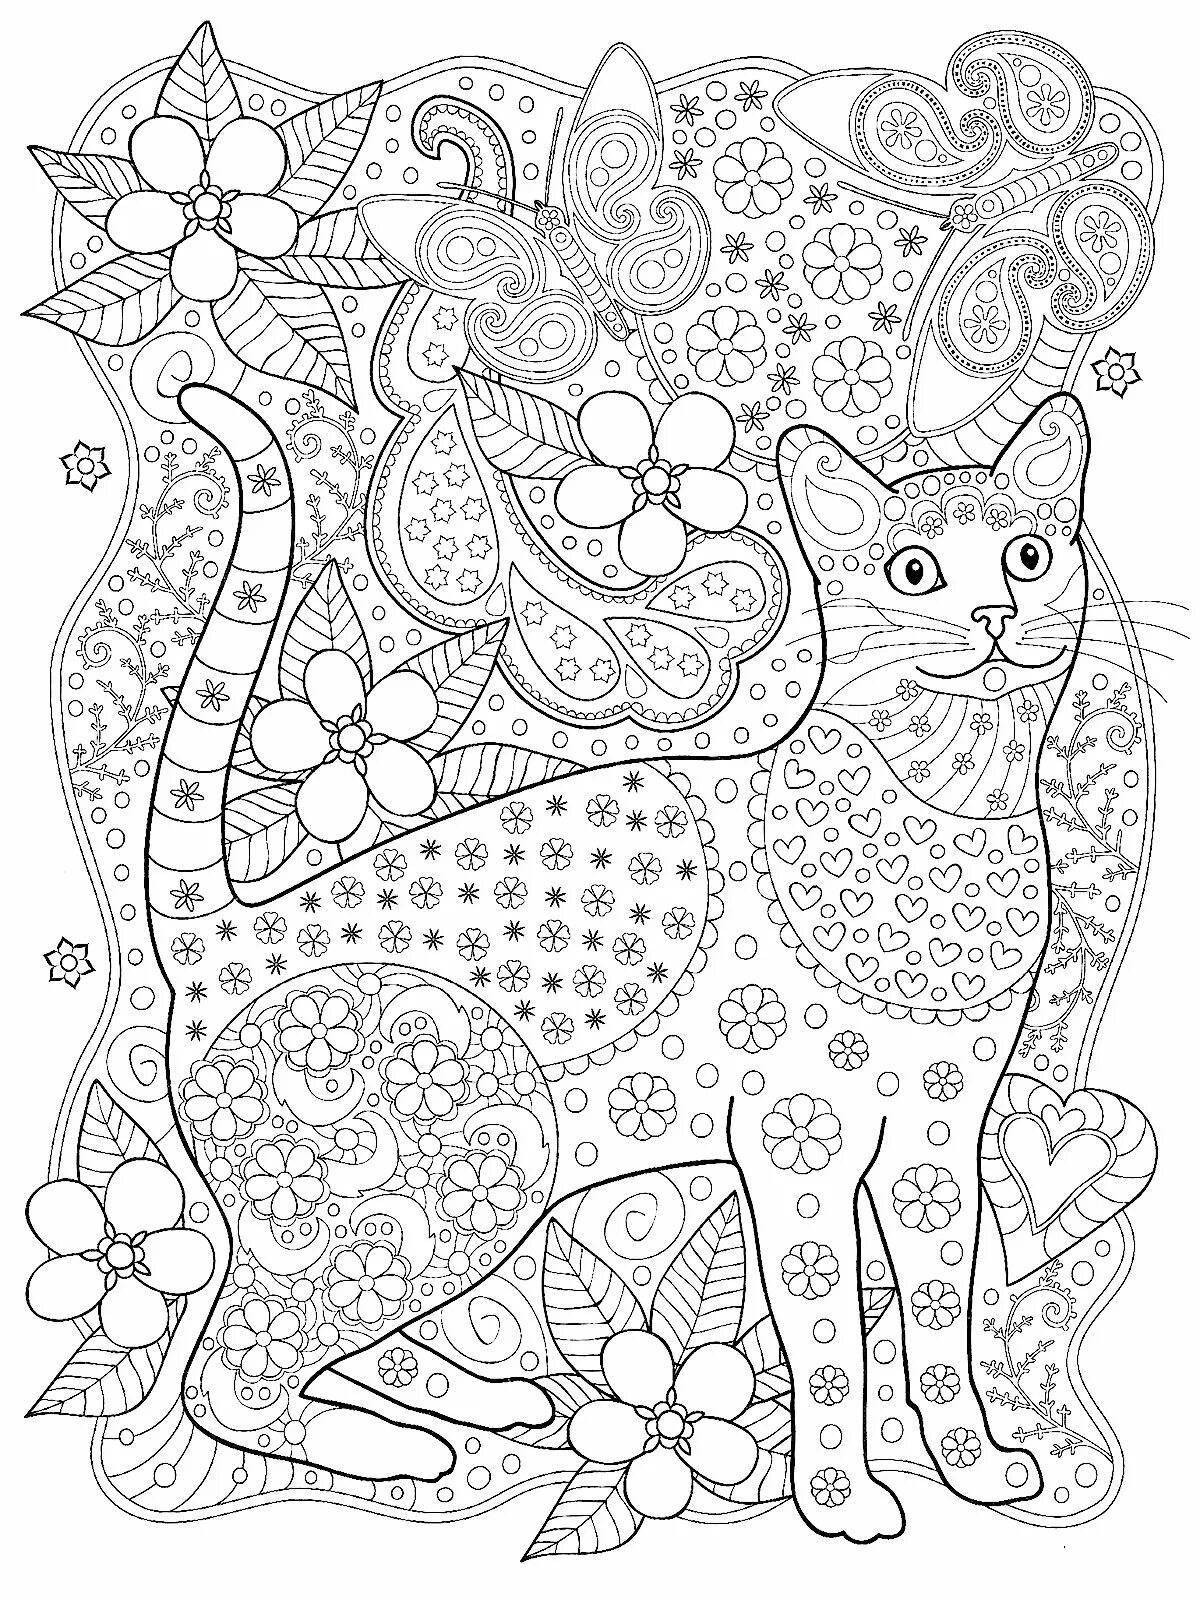 Animal coloring page with ornament